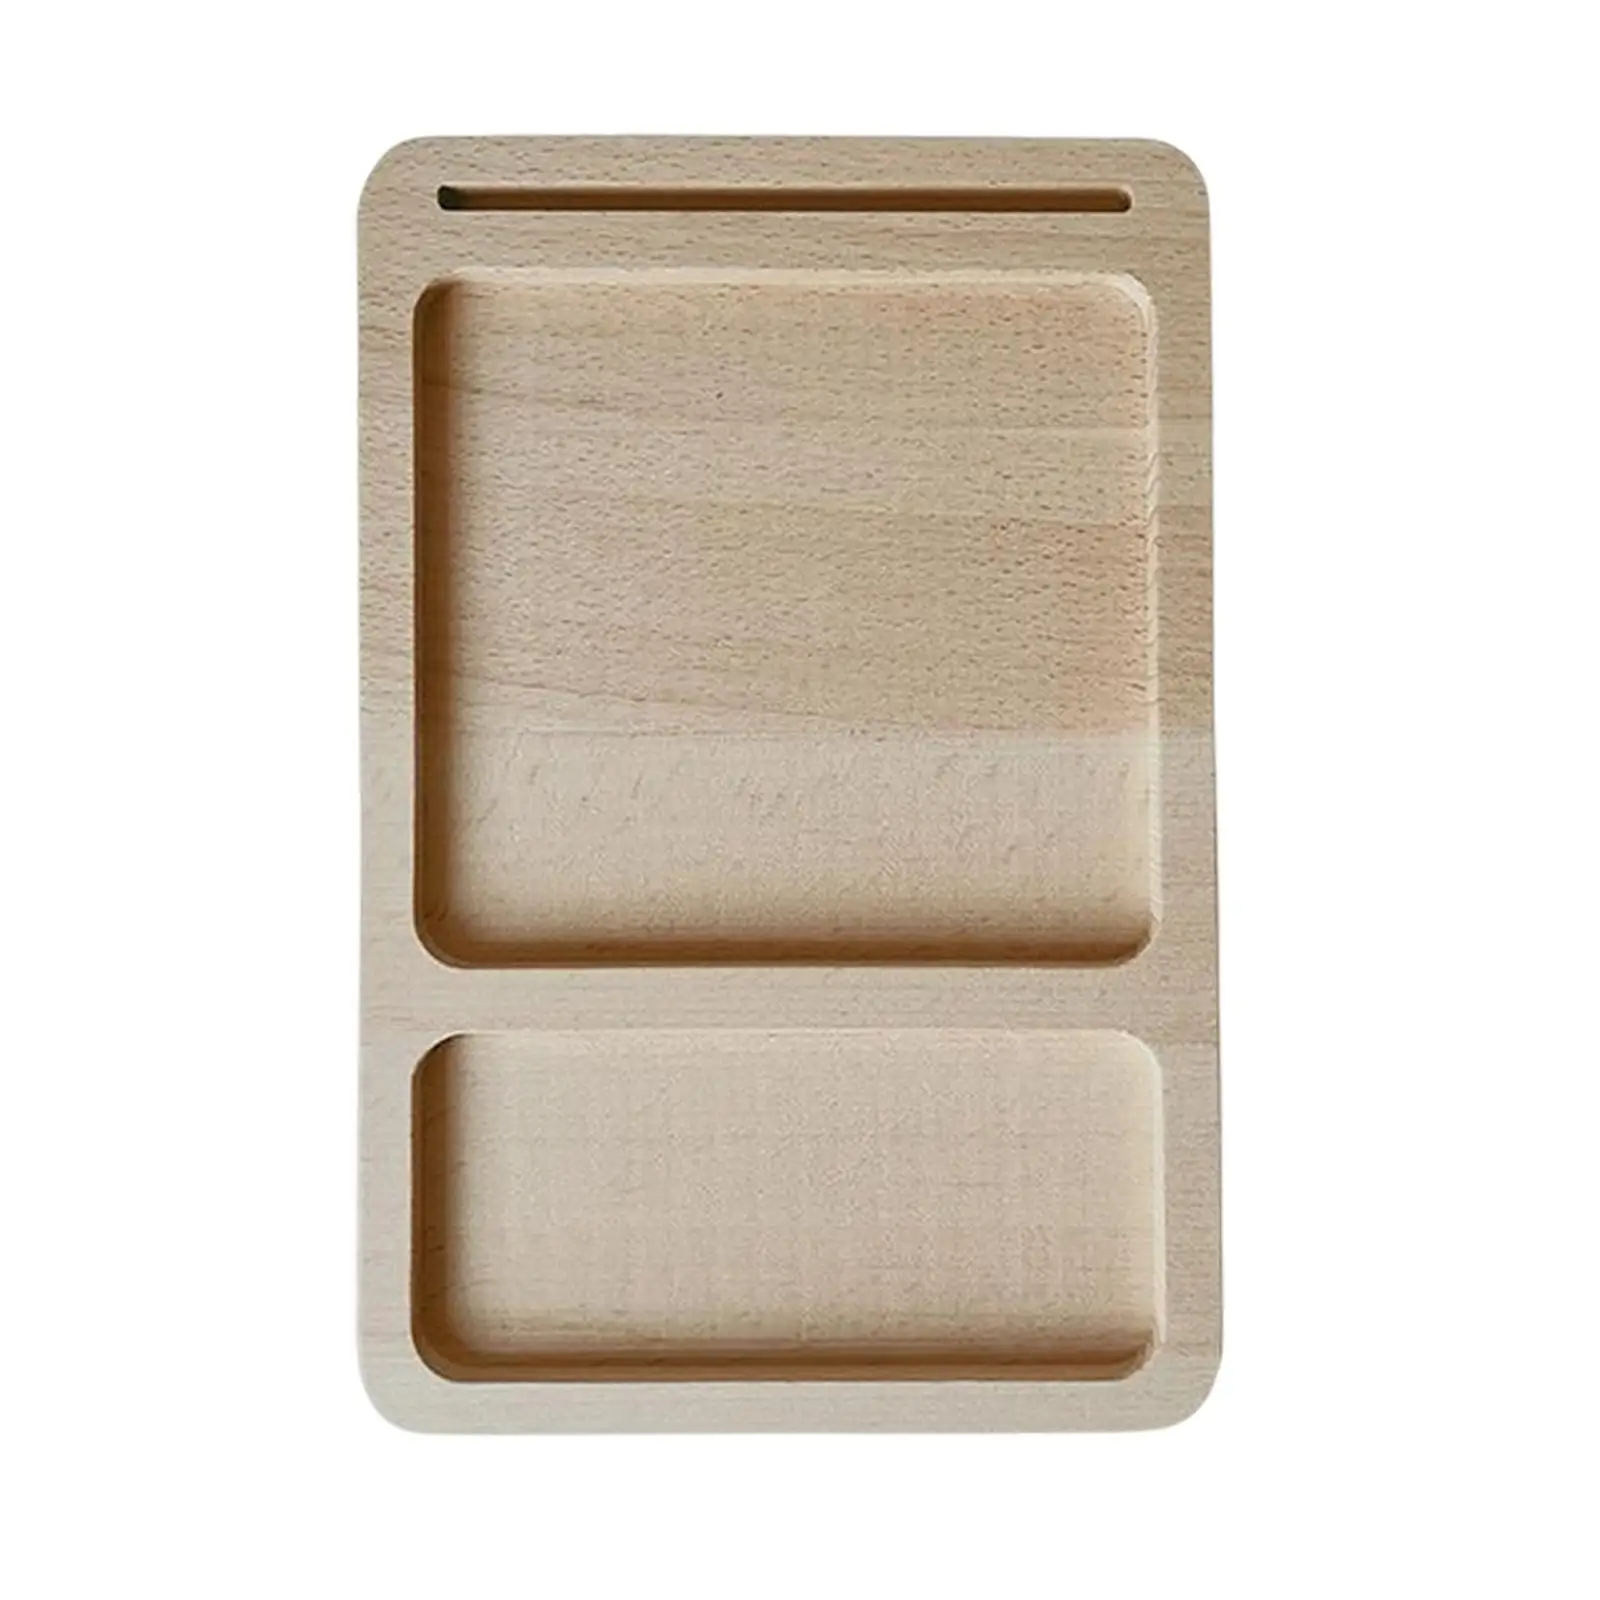 Montessori Sand Tray Puzzle Gift with Flashcard Holder Sensory for